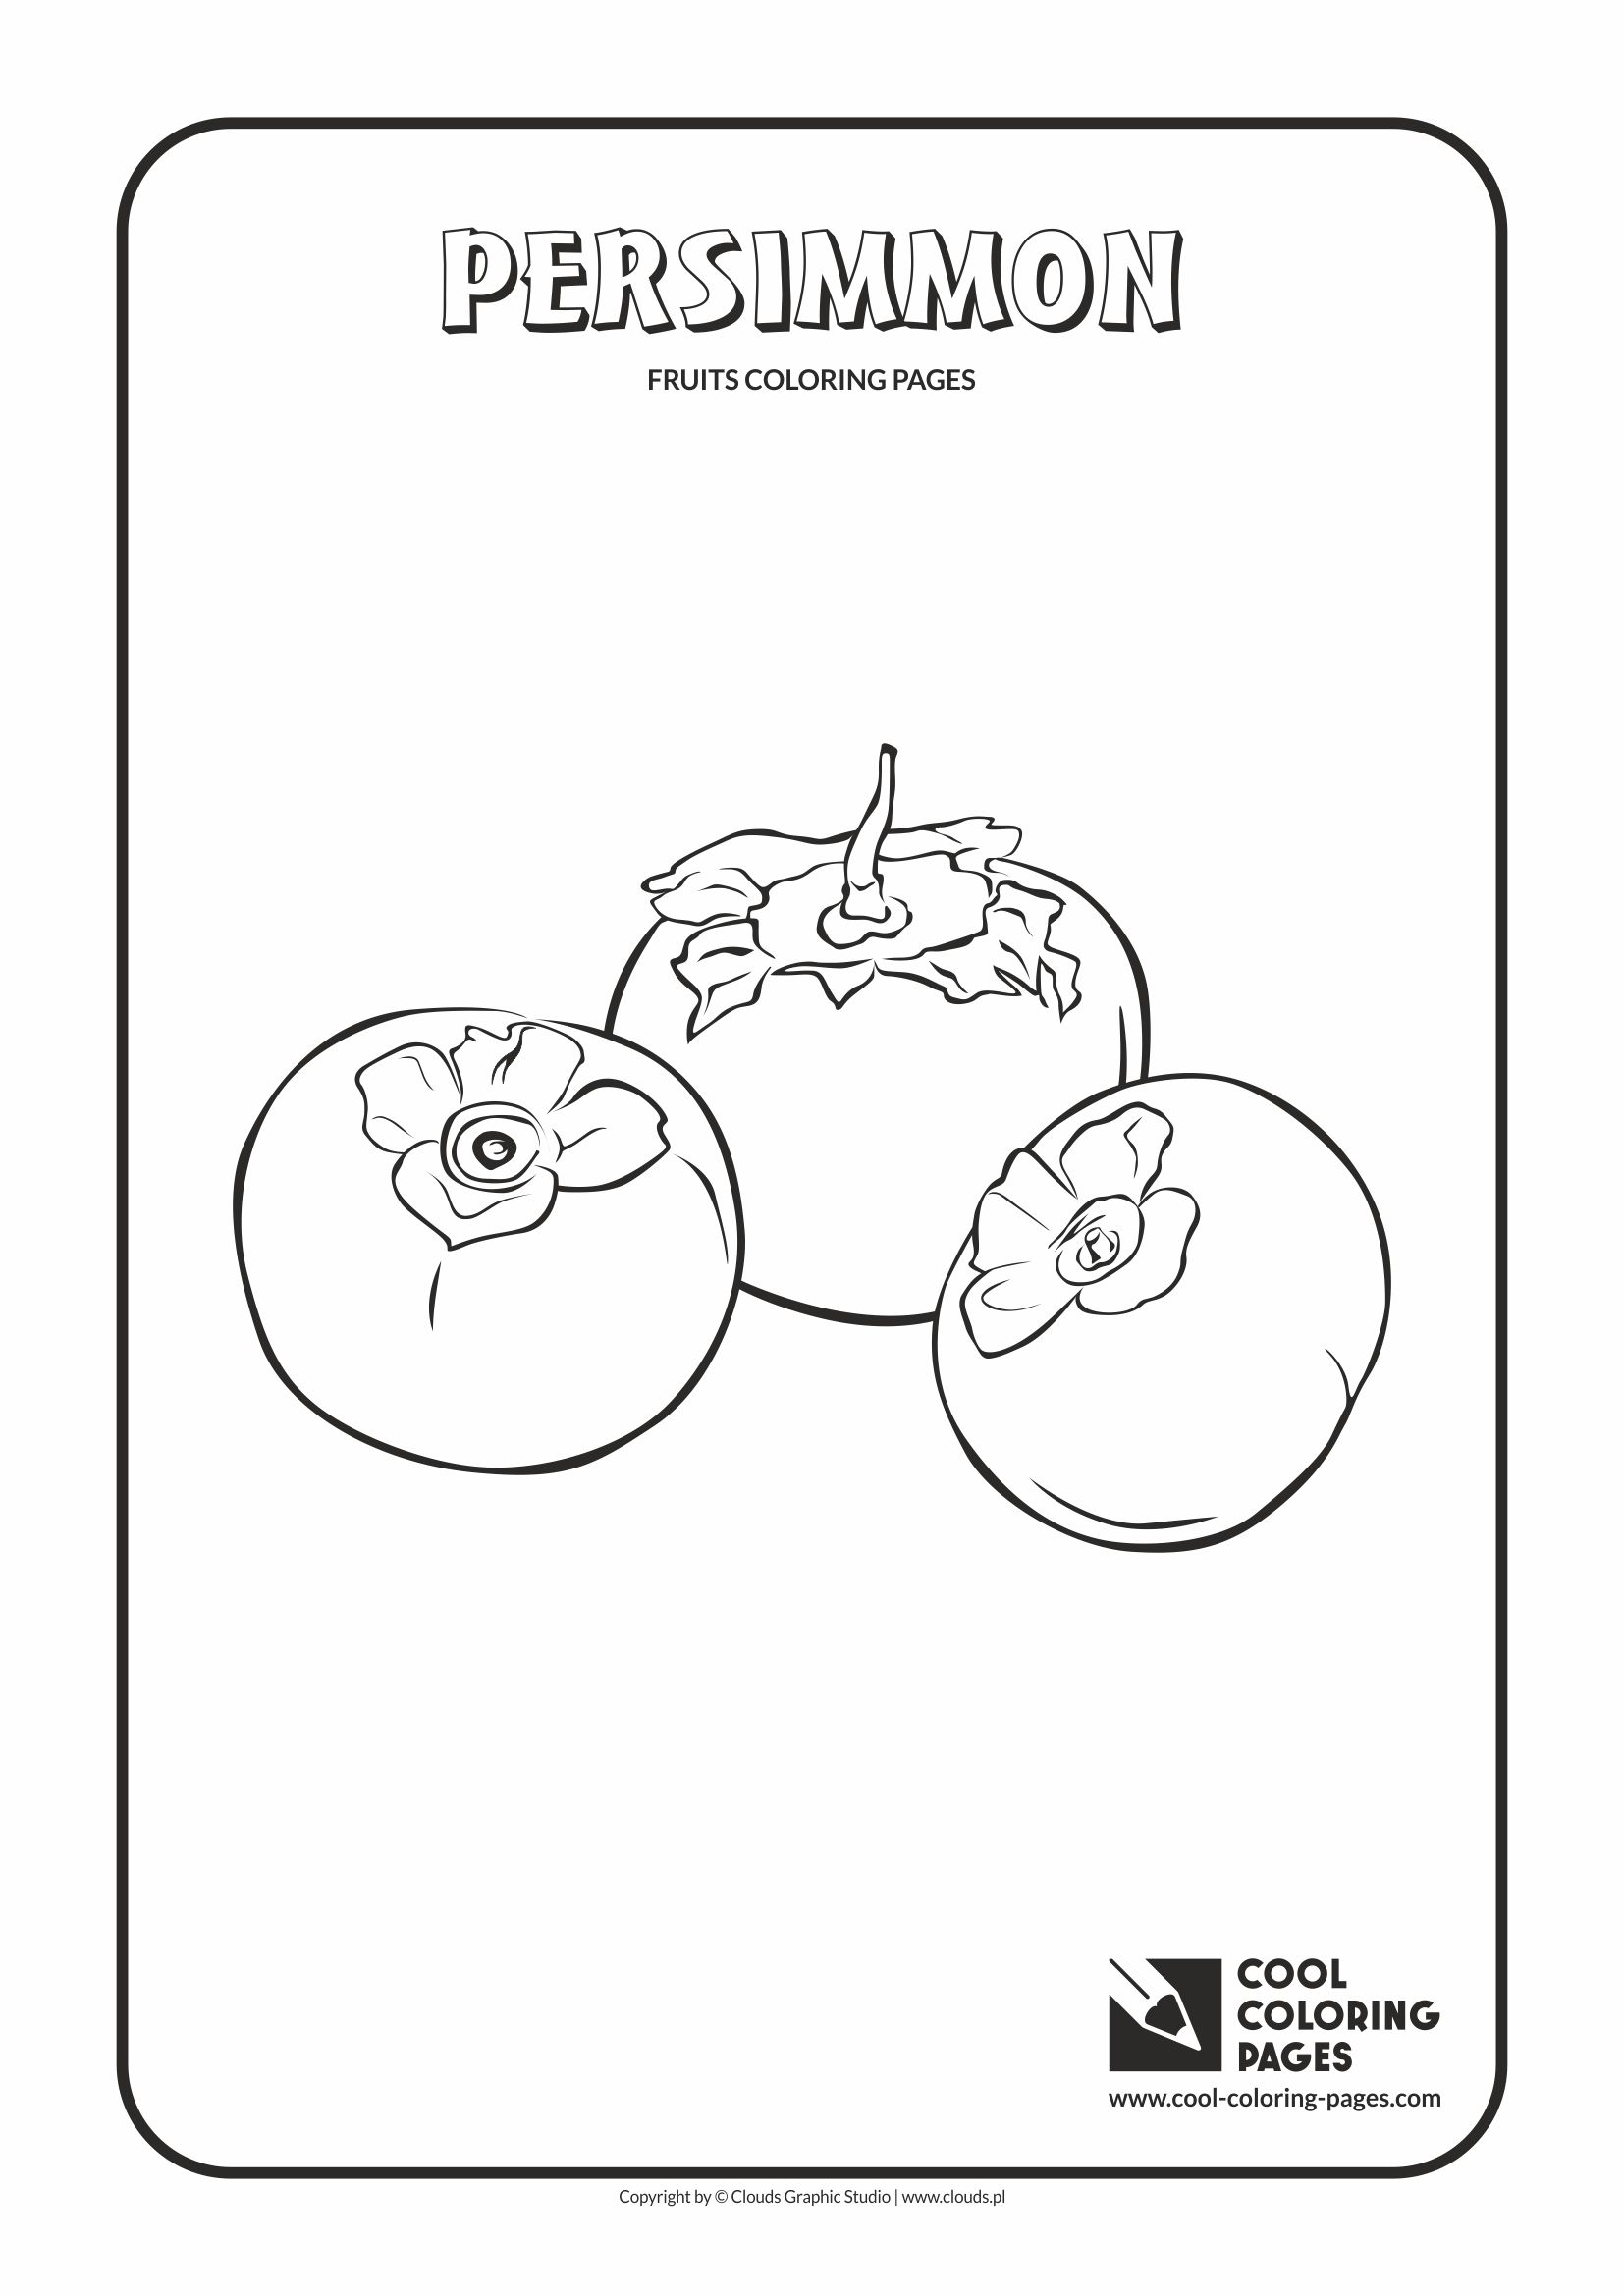 Cool Coloring Pages - Plants / Persimmon / Coloring page with persimmon